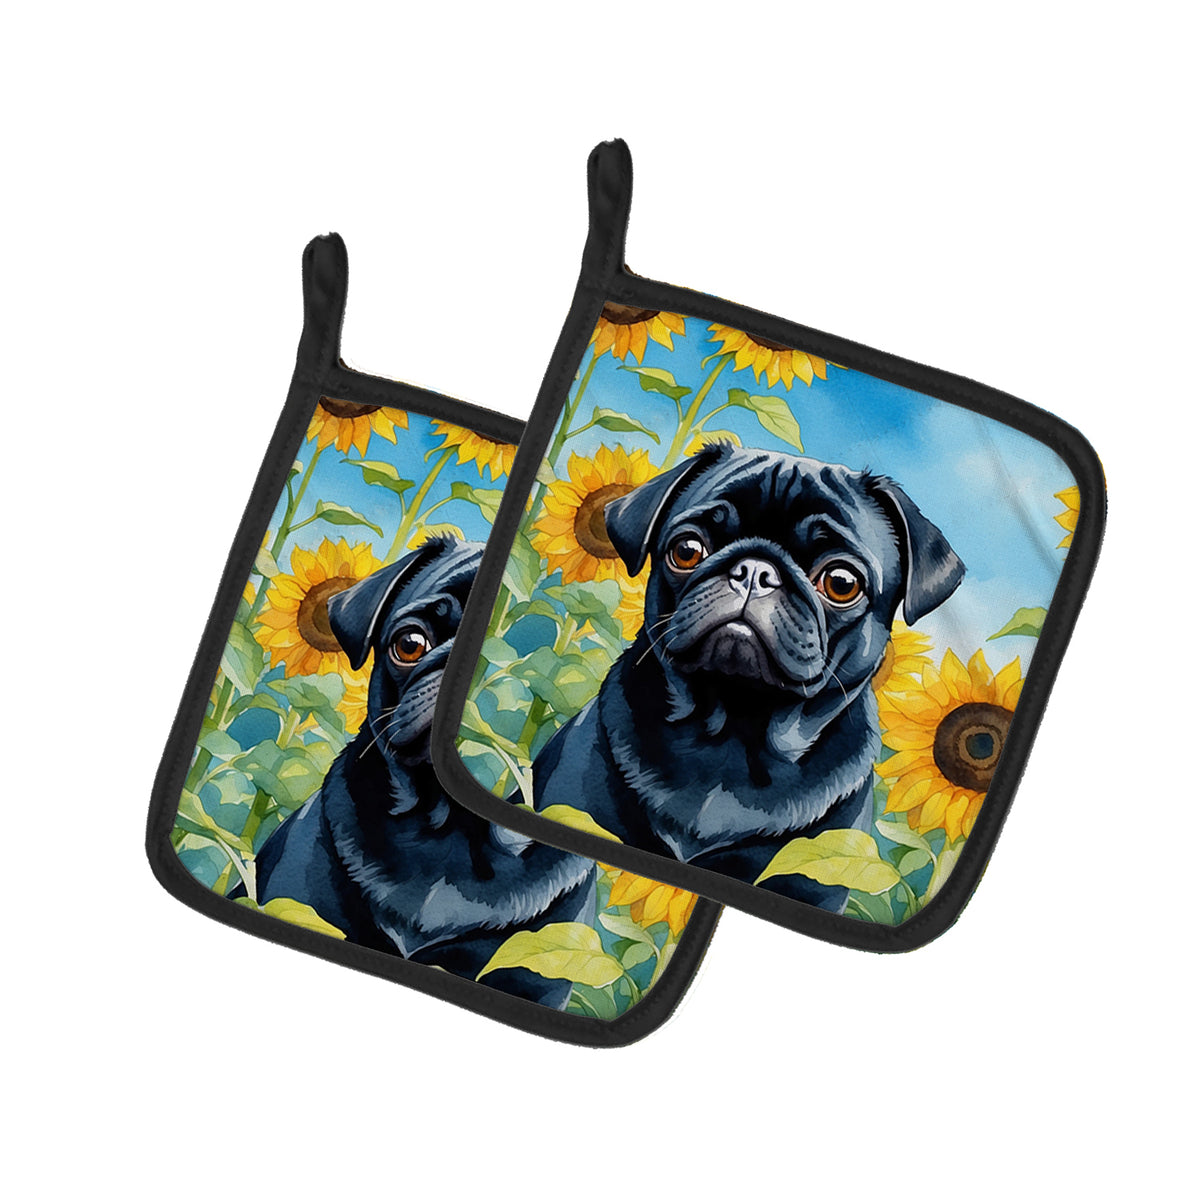 Buy this Pug in Sunflowers Pair of Pot Holders